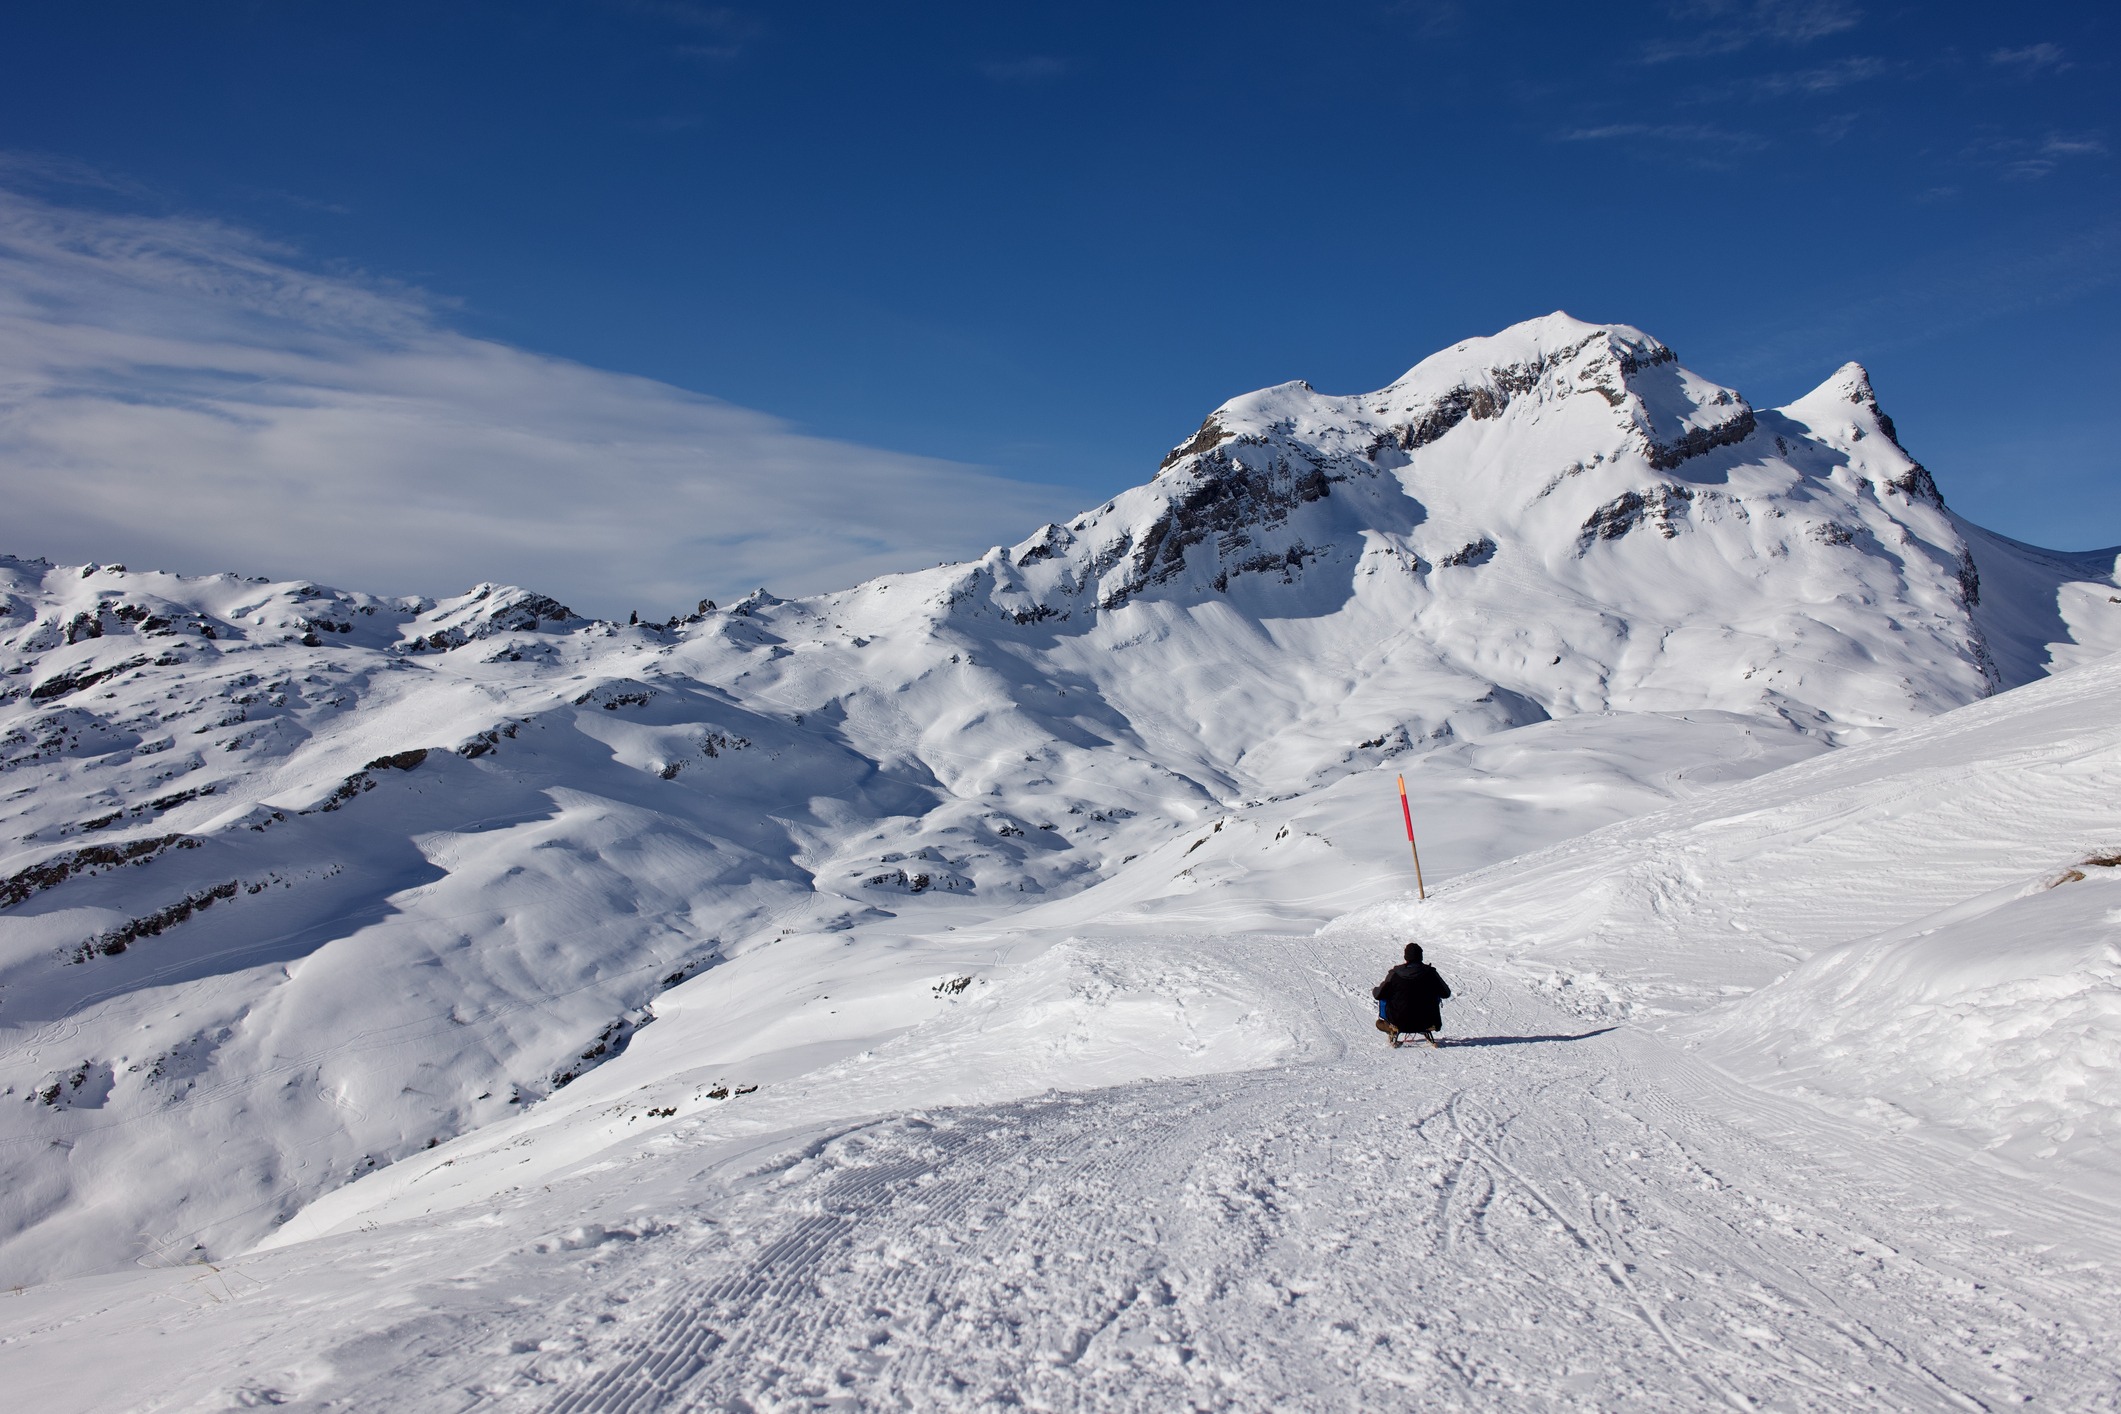 Sledding in First, Grindelwald of the Swiss Alps